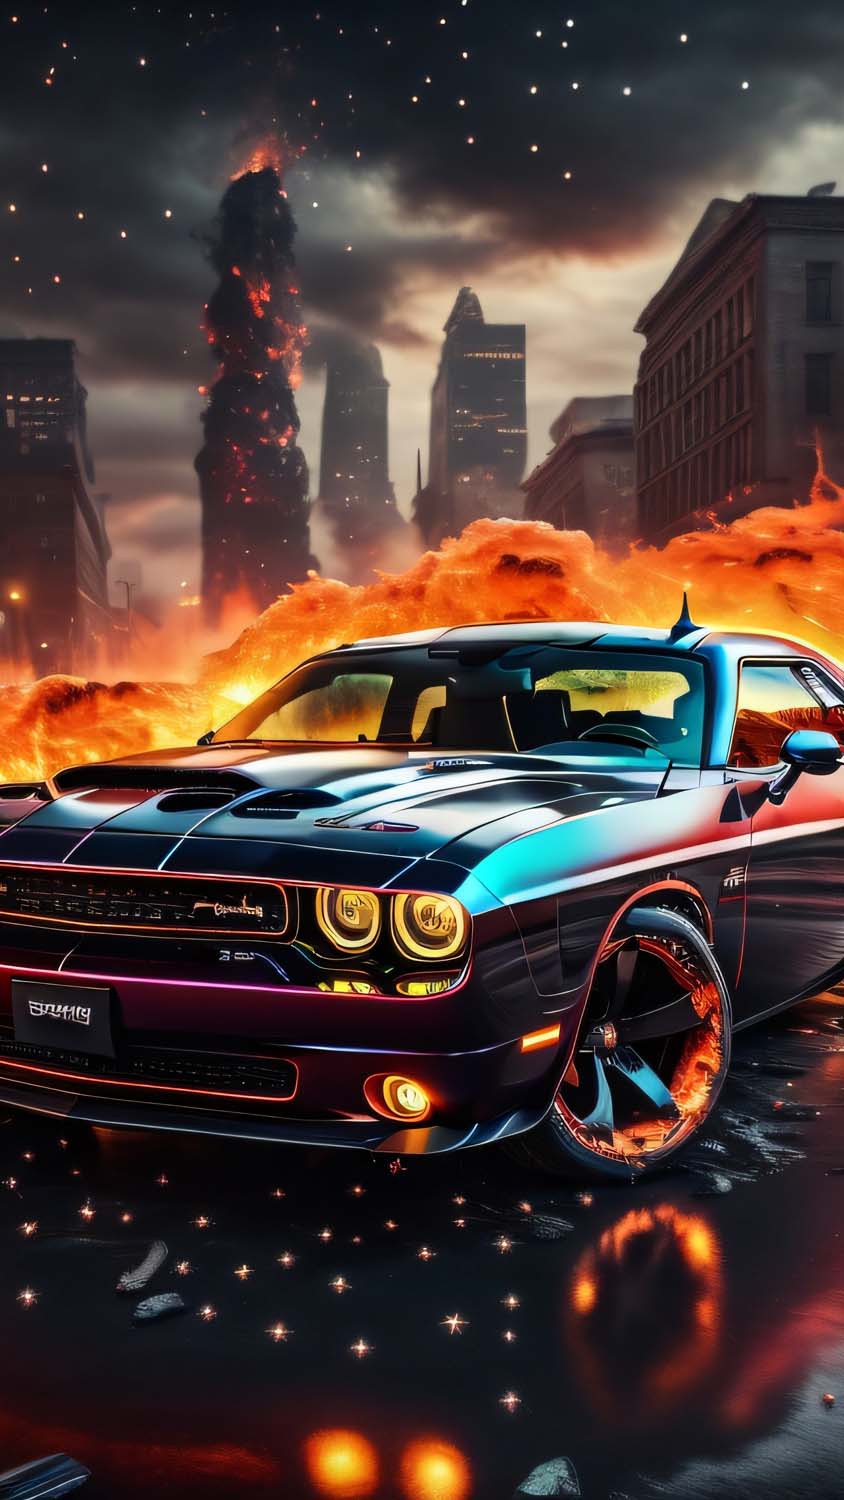 1080x1920 / 1080x1920 dodge challenger, dodge, cars, hd, behance for Iphone  6, 7, 8 wallpaper - Coolwallpapers.me!